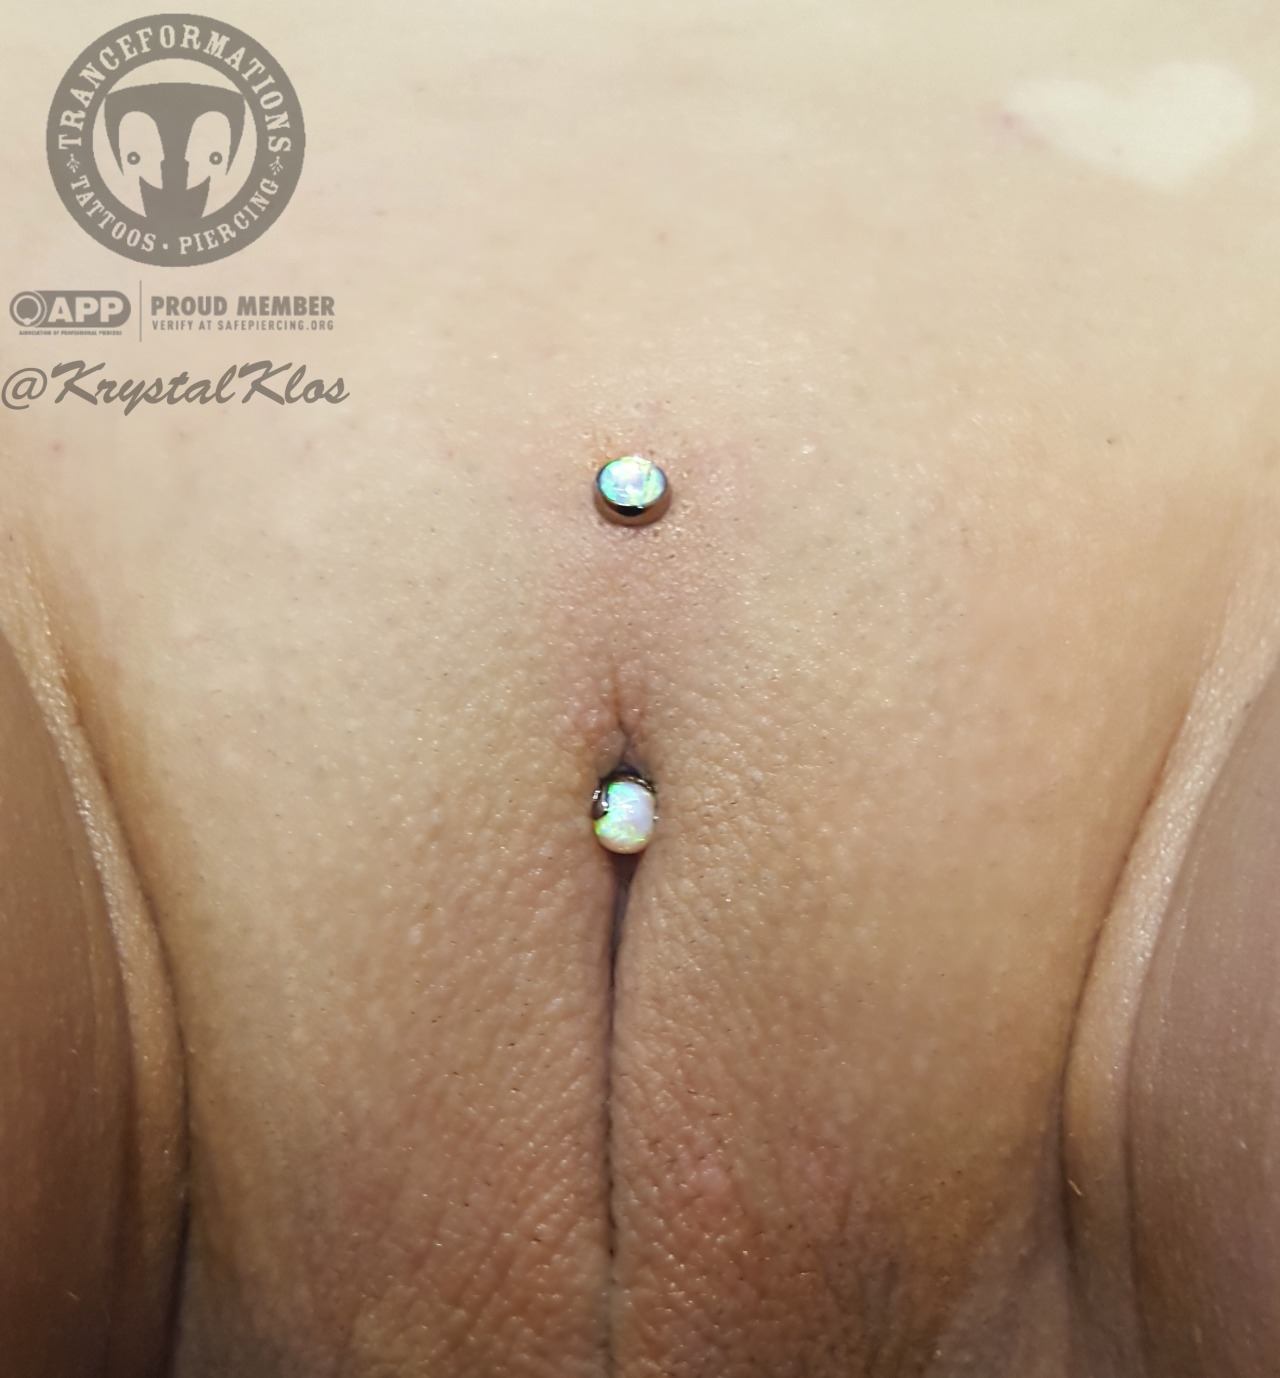 Body Piercing And Genital Tattoo Pictures 32